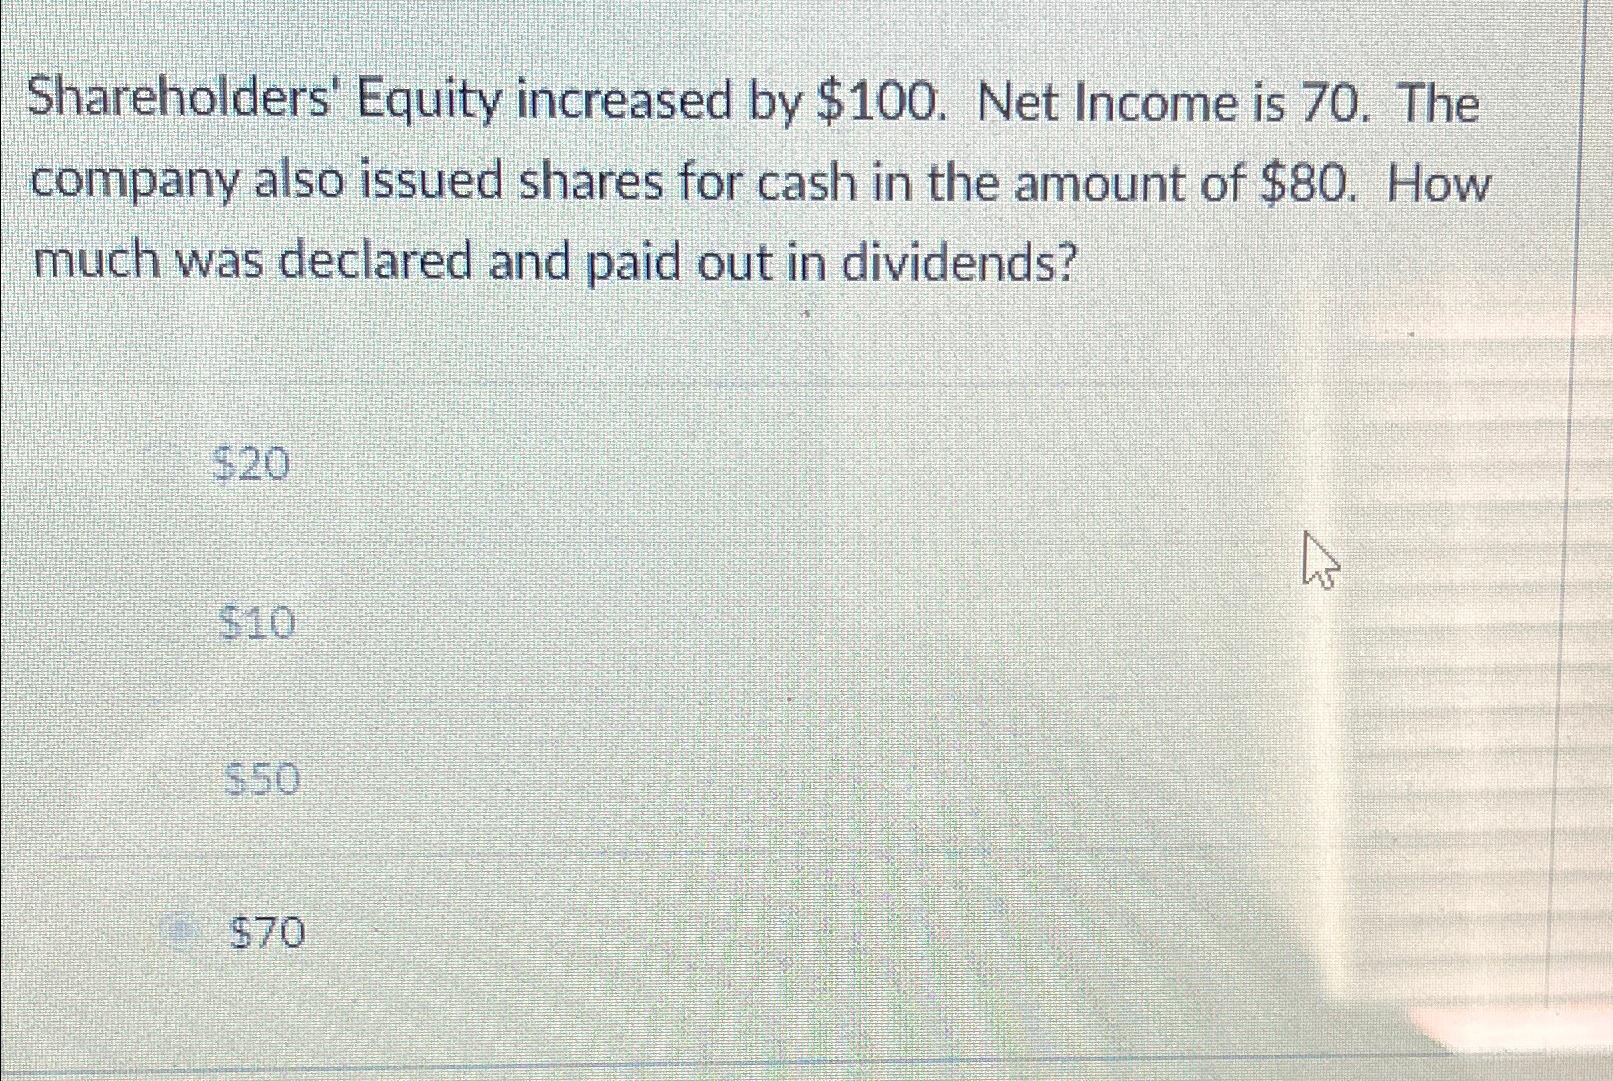 Shareholders' Equity increased by $100. Net Income is 70. The company also issued shares for cash in the